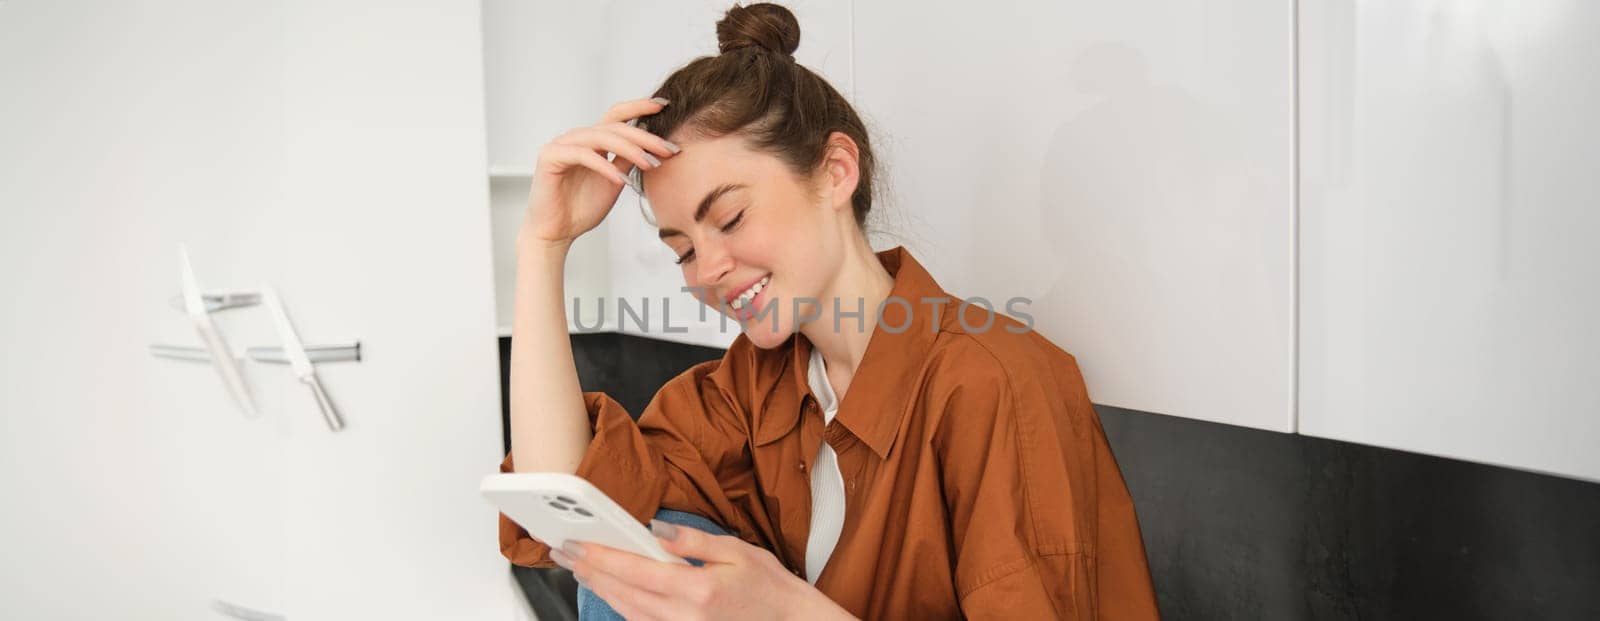 Young woman sitting at home on kitchen counter and using her smartphone. Concept of social media, leisure and mobile connection.